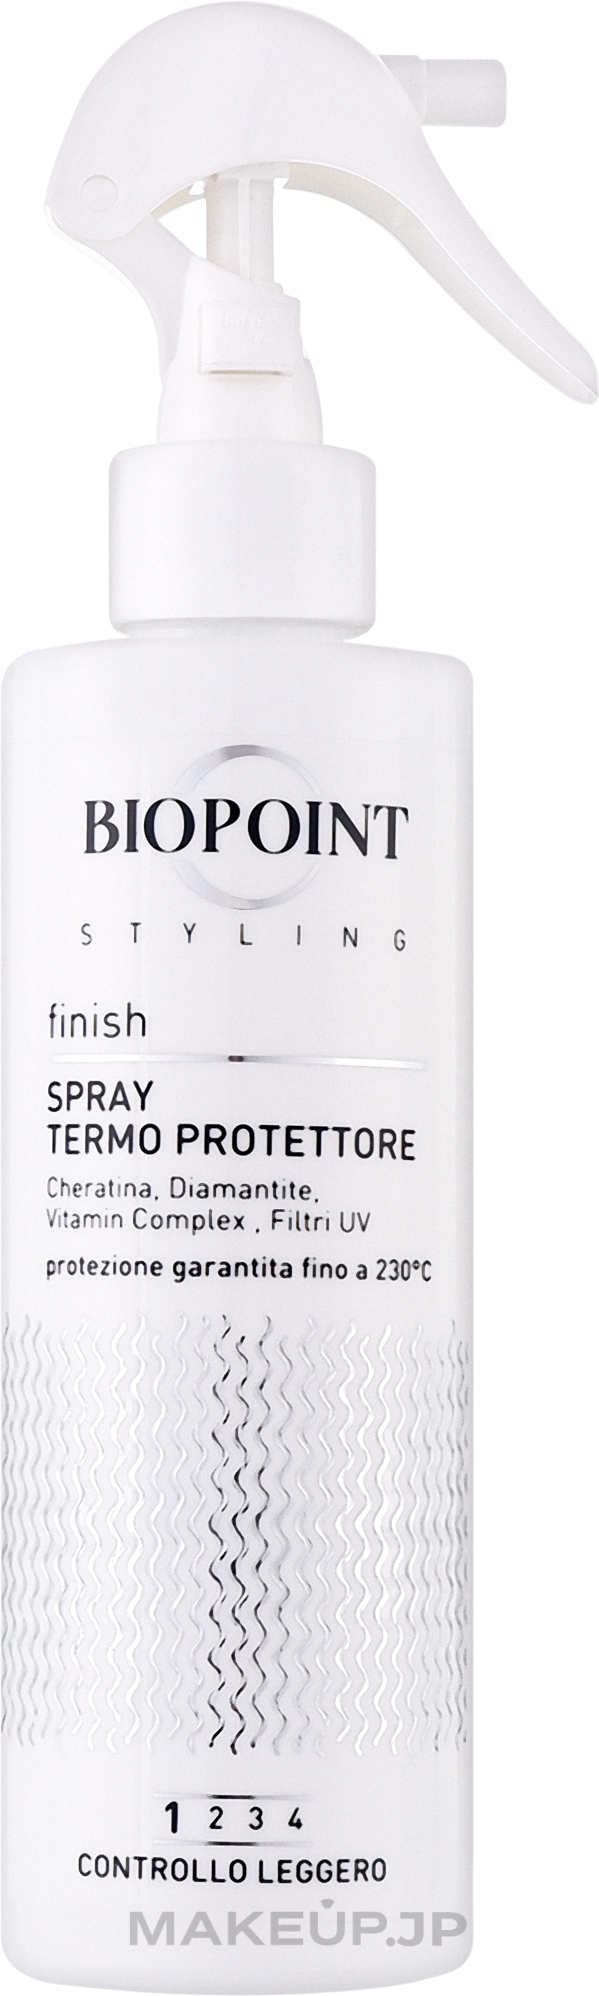 Thermal Protection Hair Spray - Biopoint Haarspray Thermo-Schutz Finish — photo 200 ml